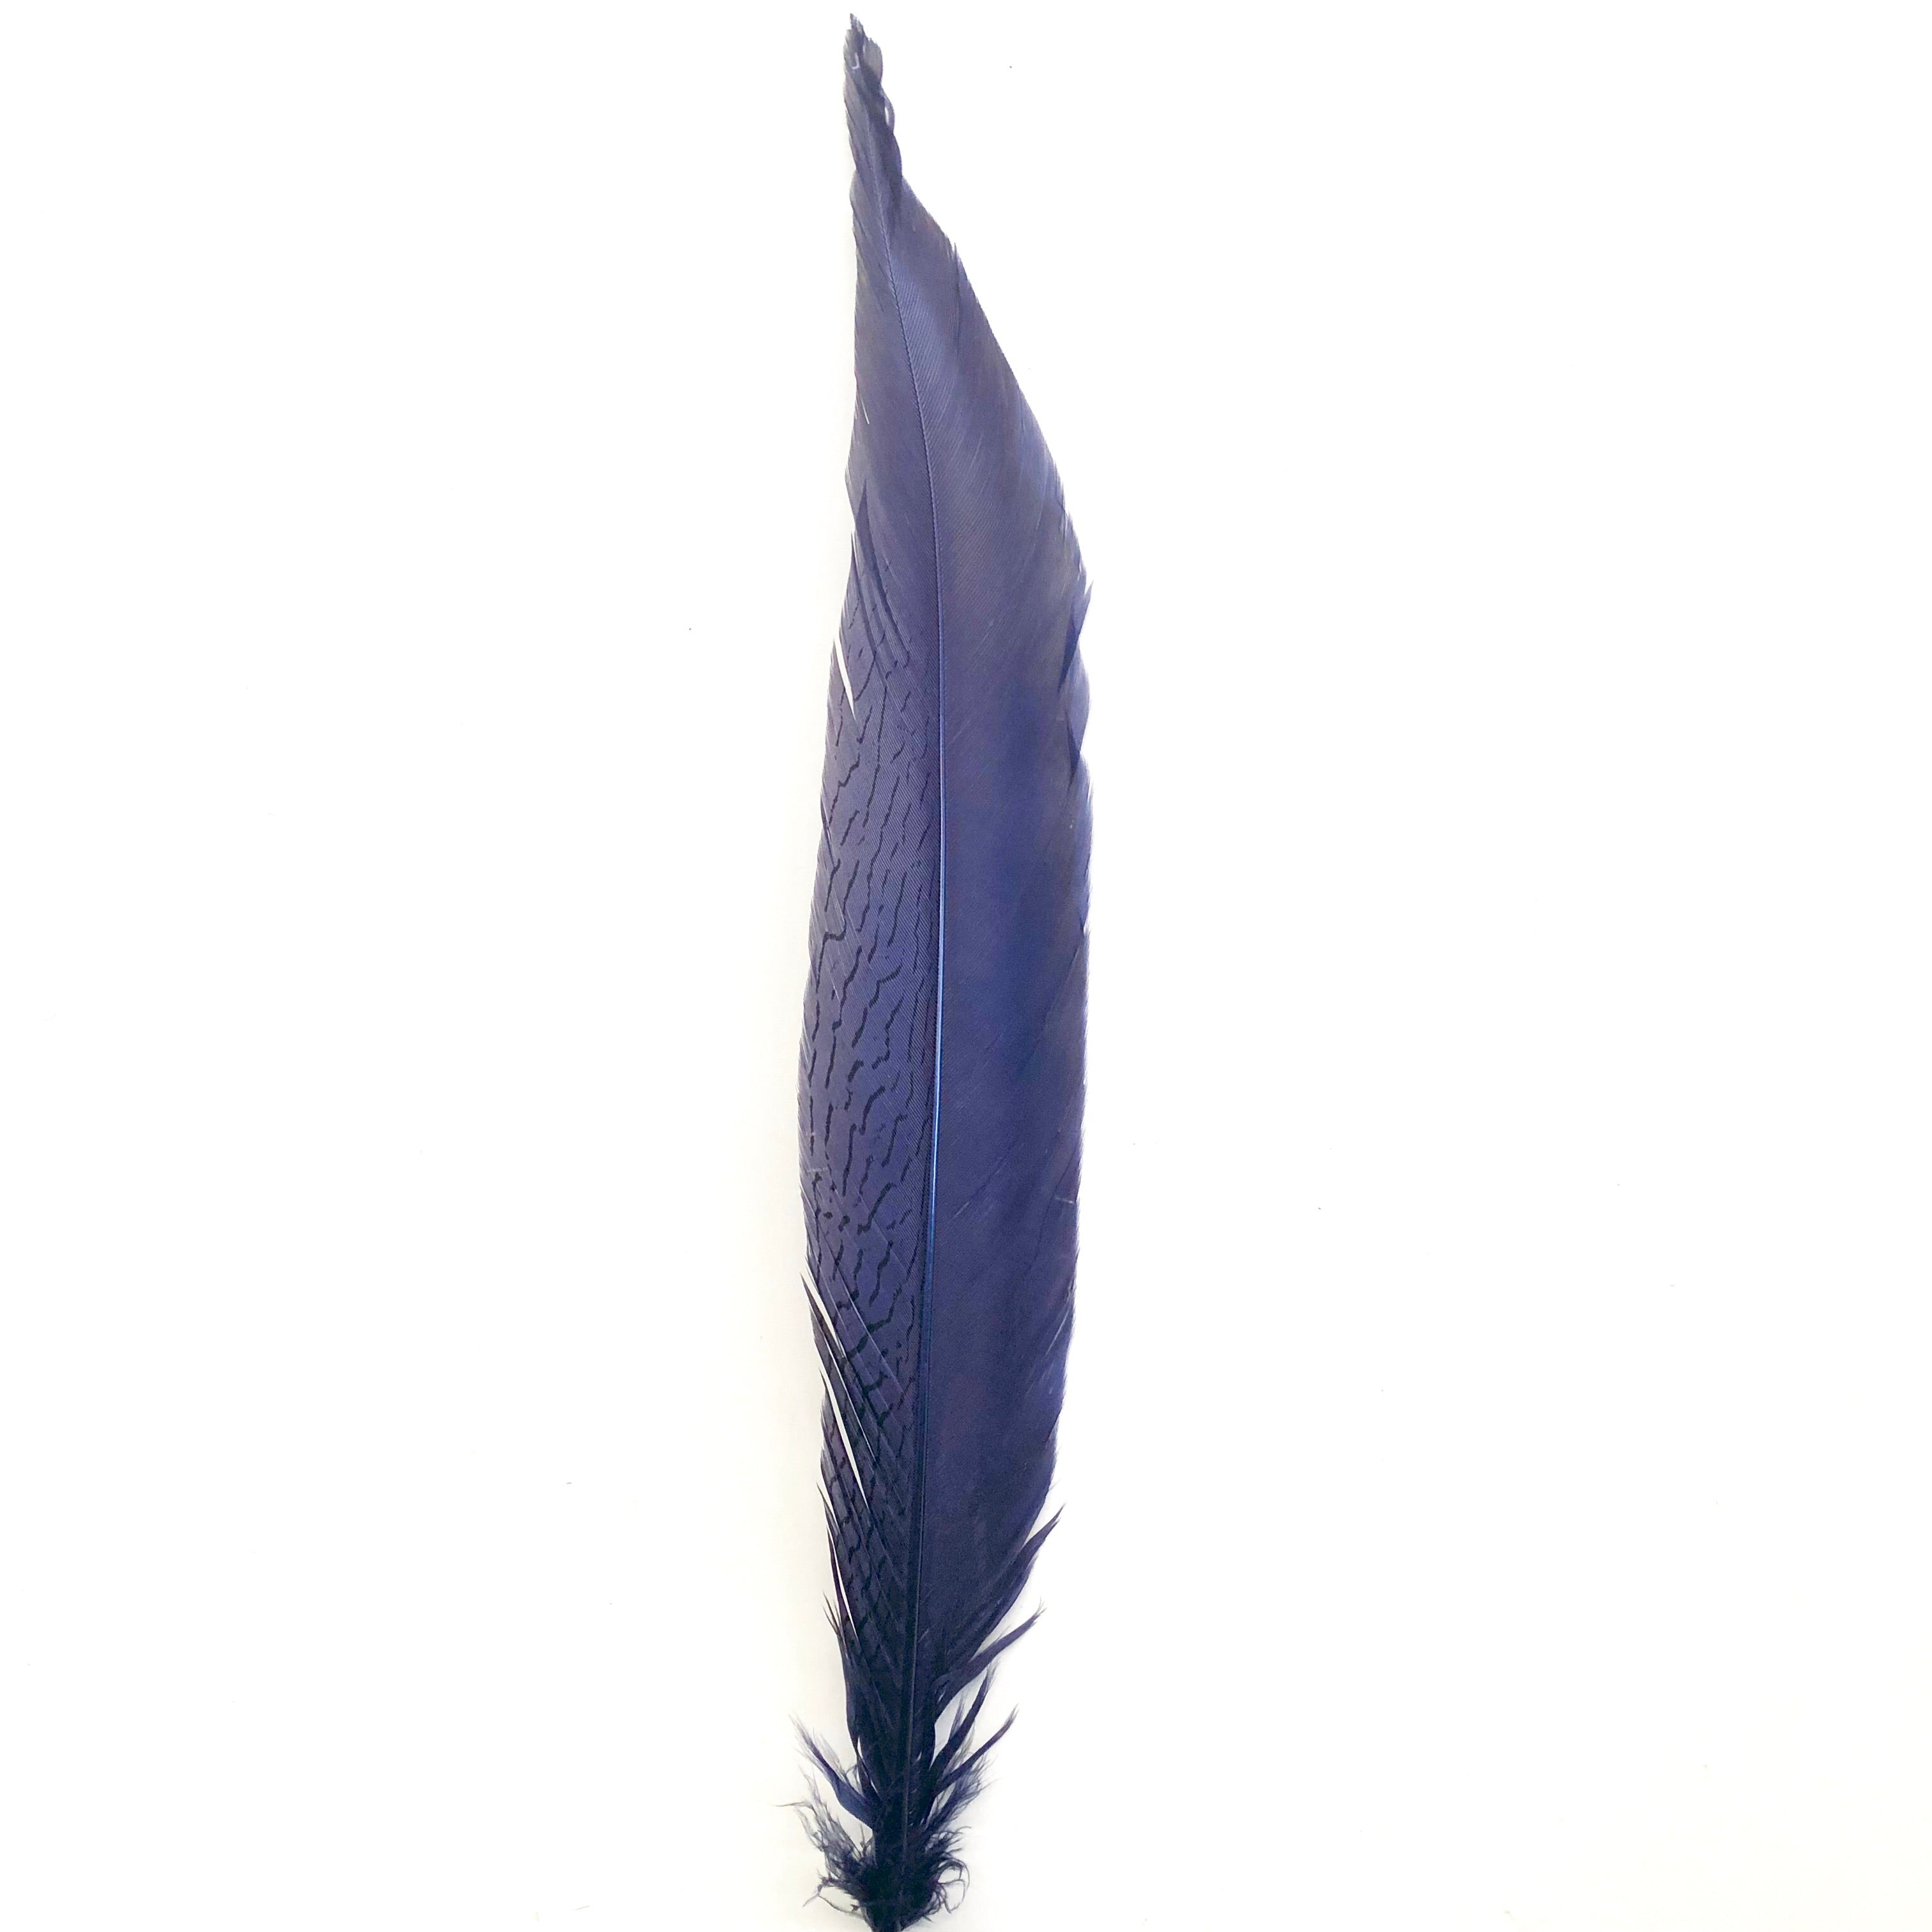 10" To 20" Silver Pheasant Tail Feather - Navy Blue ((SECONDS))